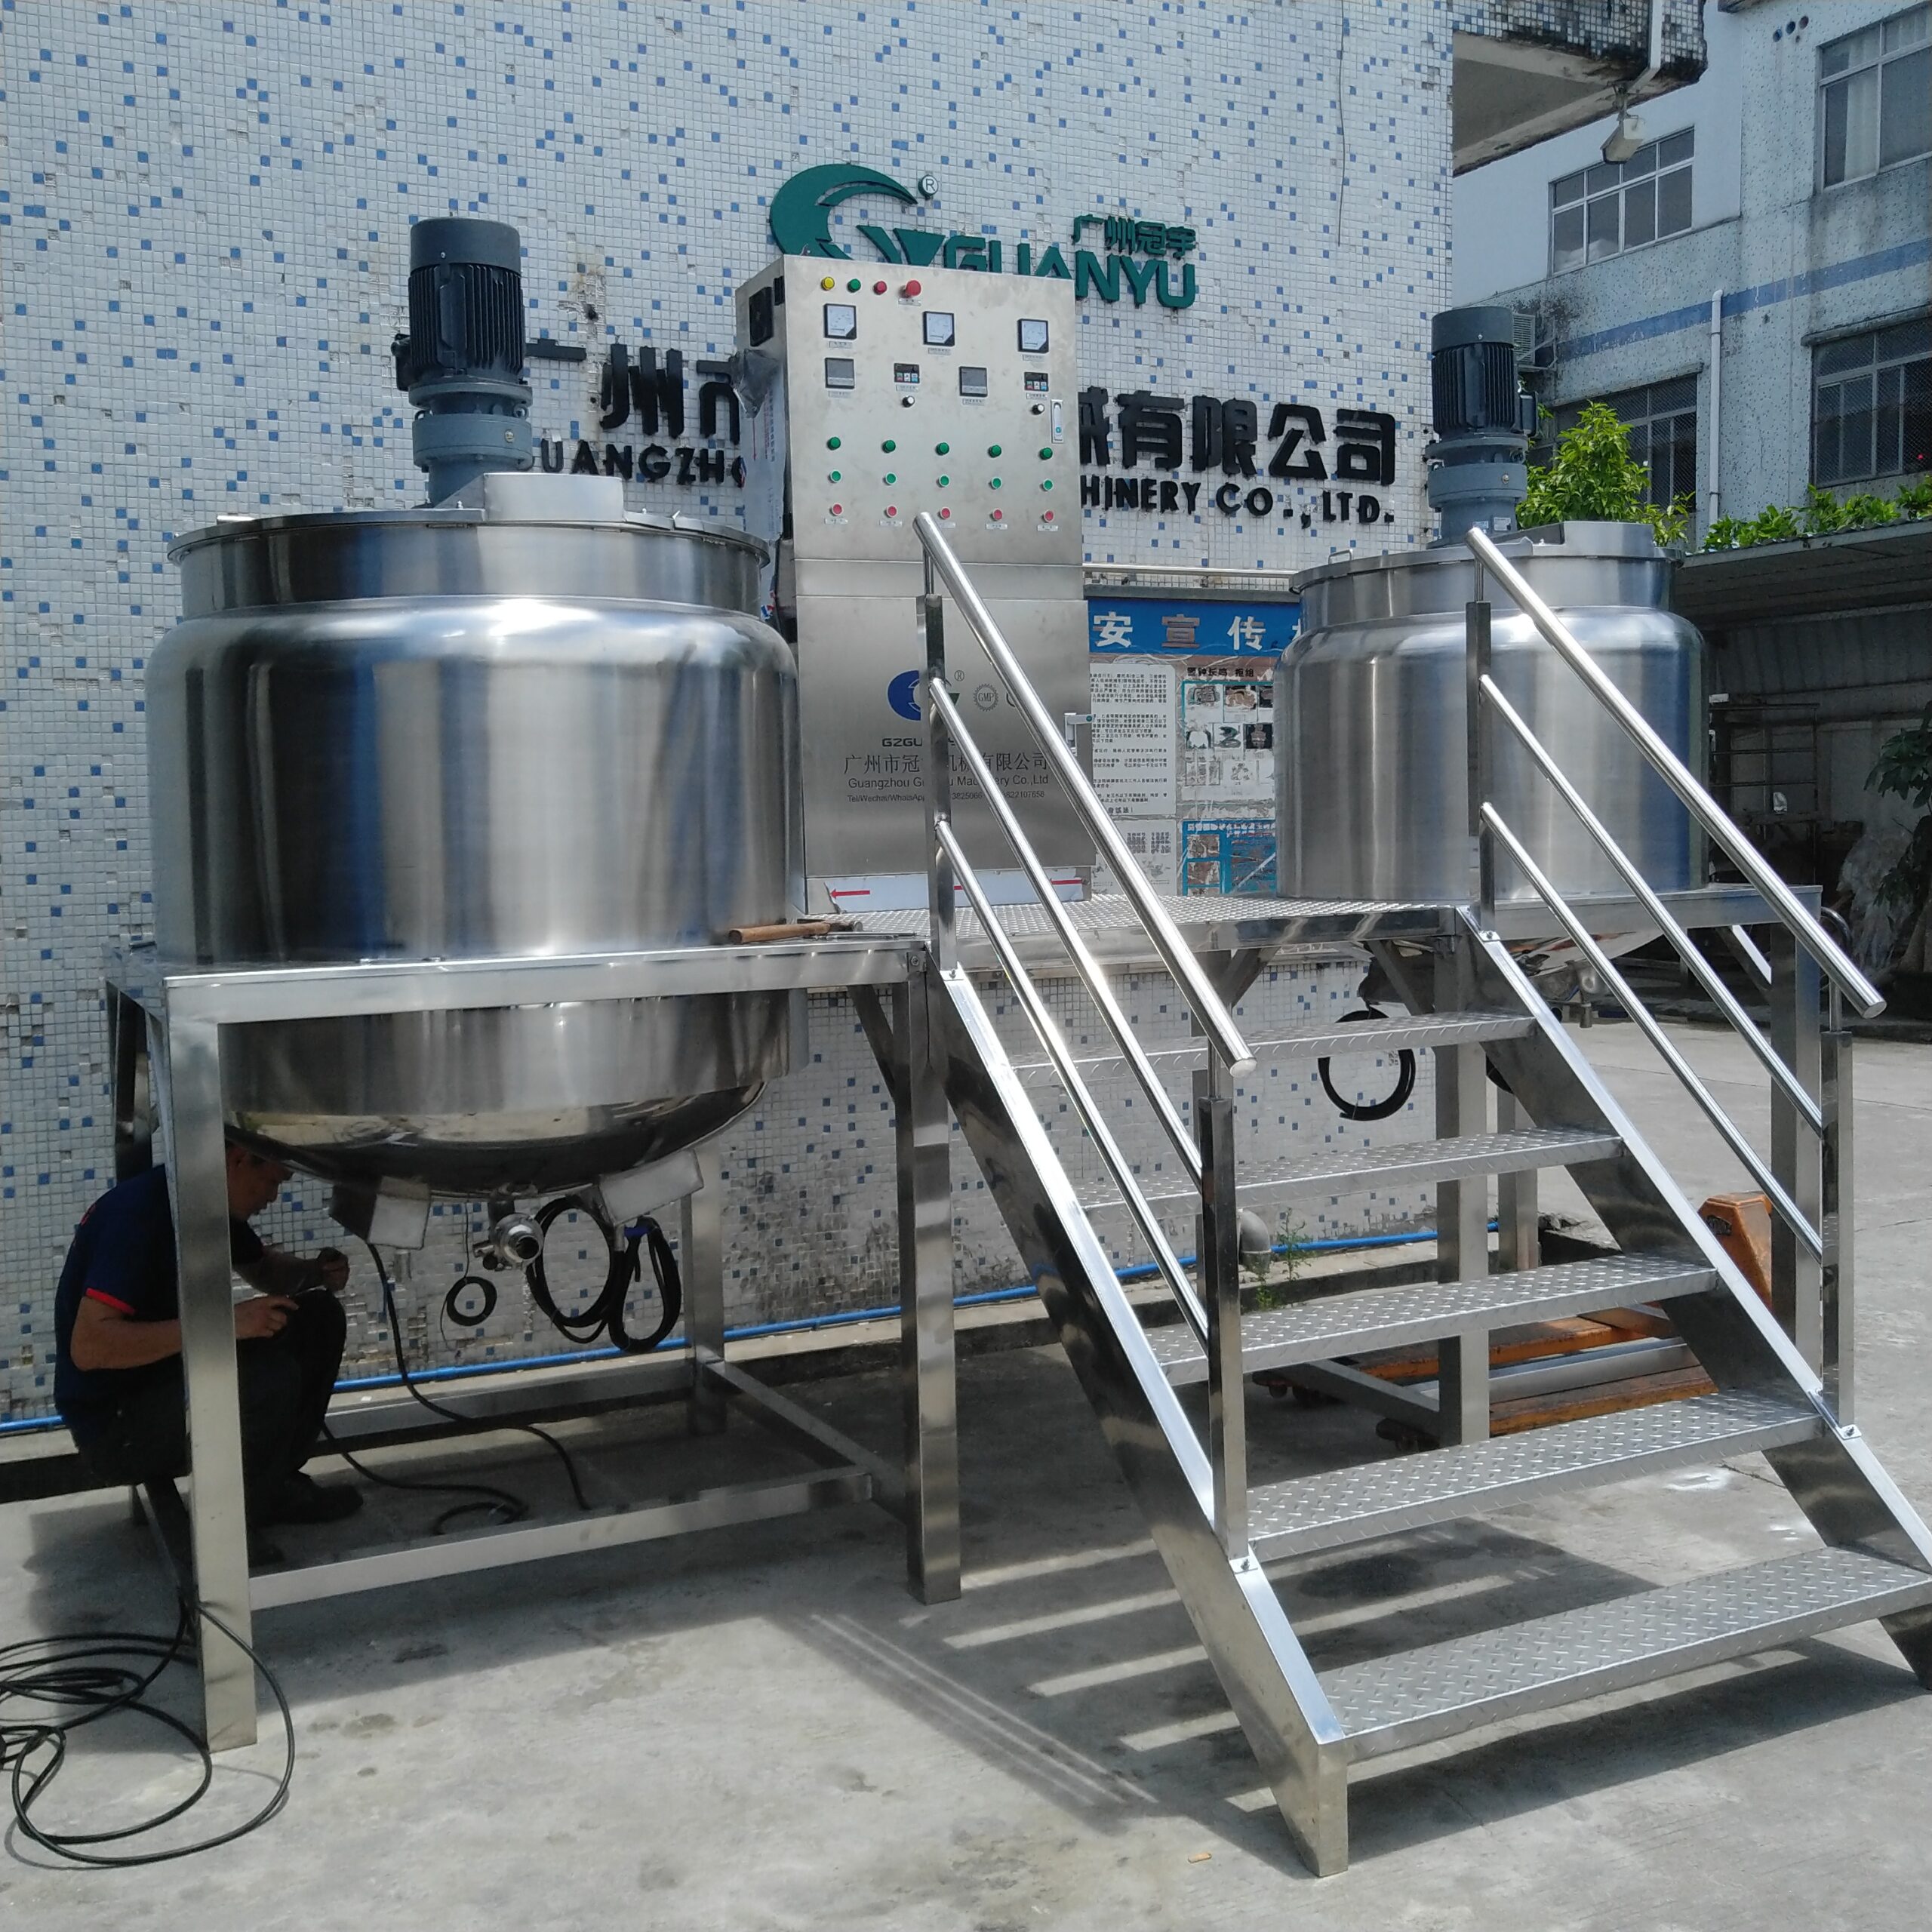 Best Mayonnaise mixing machine with homogenizier Liquid detergent mixer Company - GUANYU  in  Guangzhou